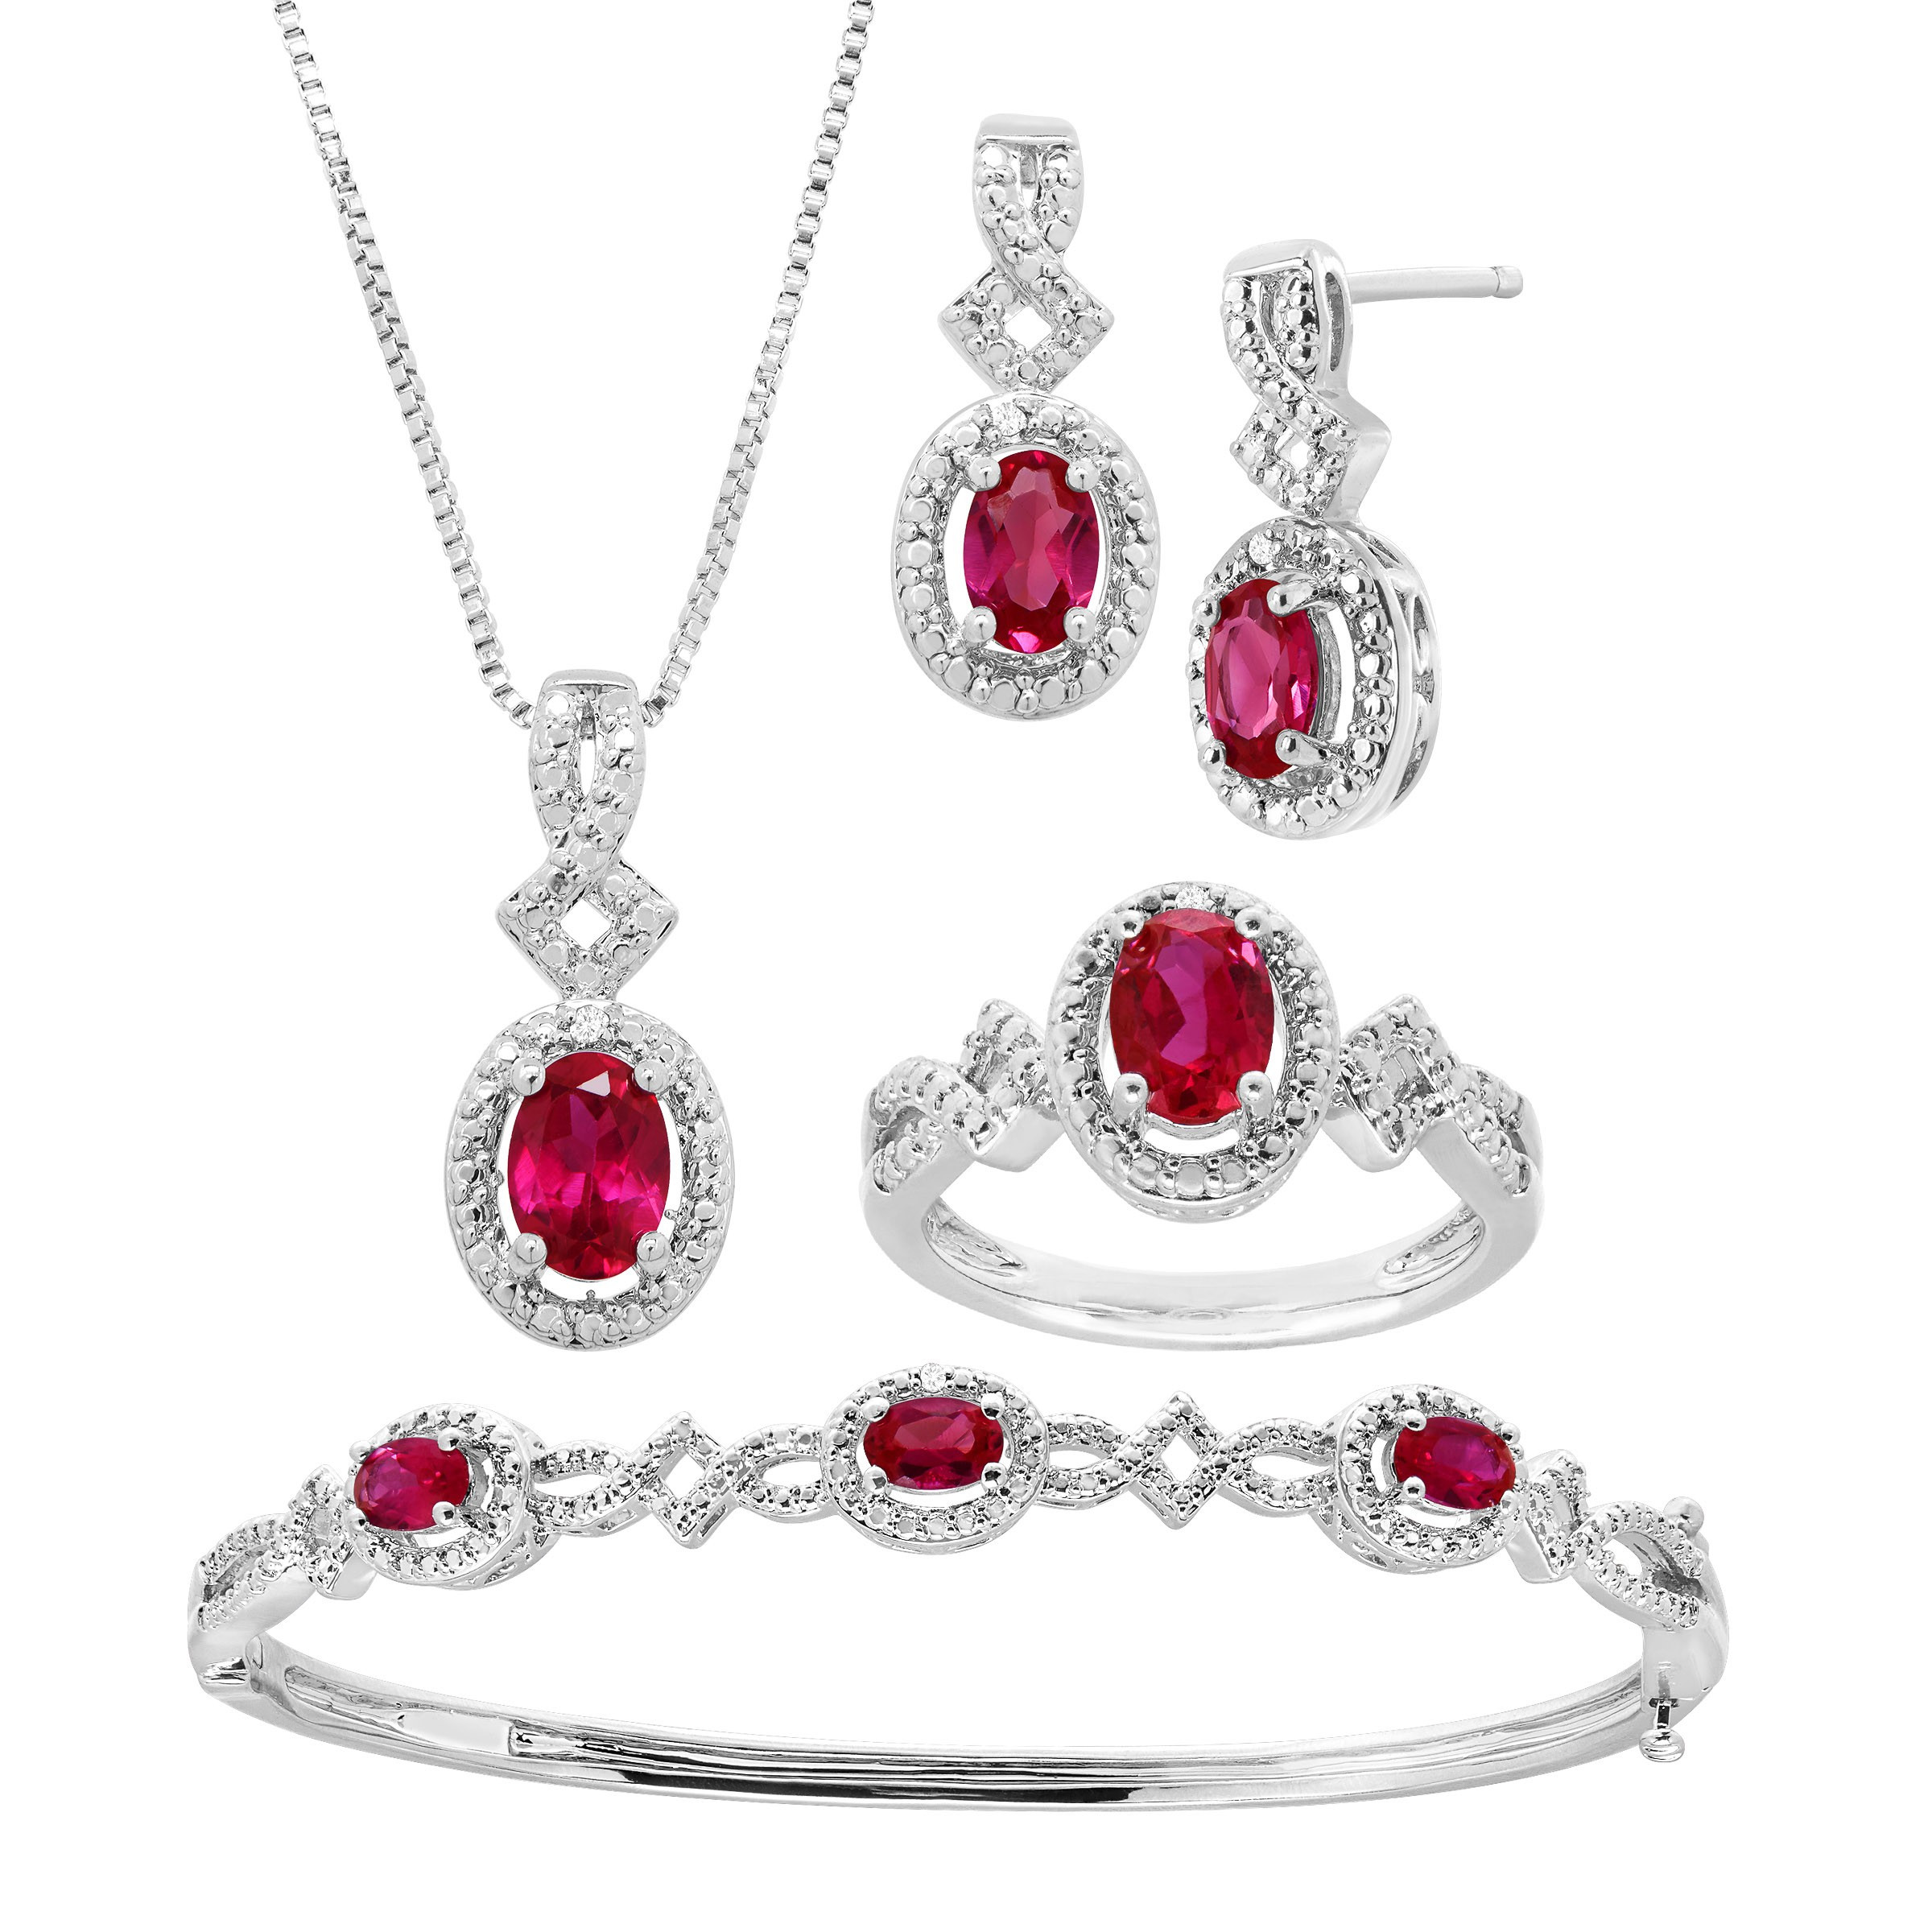 Diamond Earrings And Necklace Sets
 5 ct Created Ruby 4 Piece Jewelry Set with Diamonds in